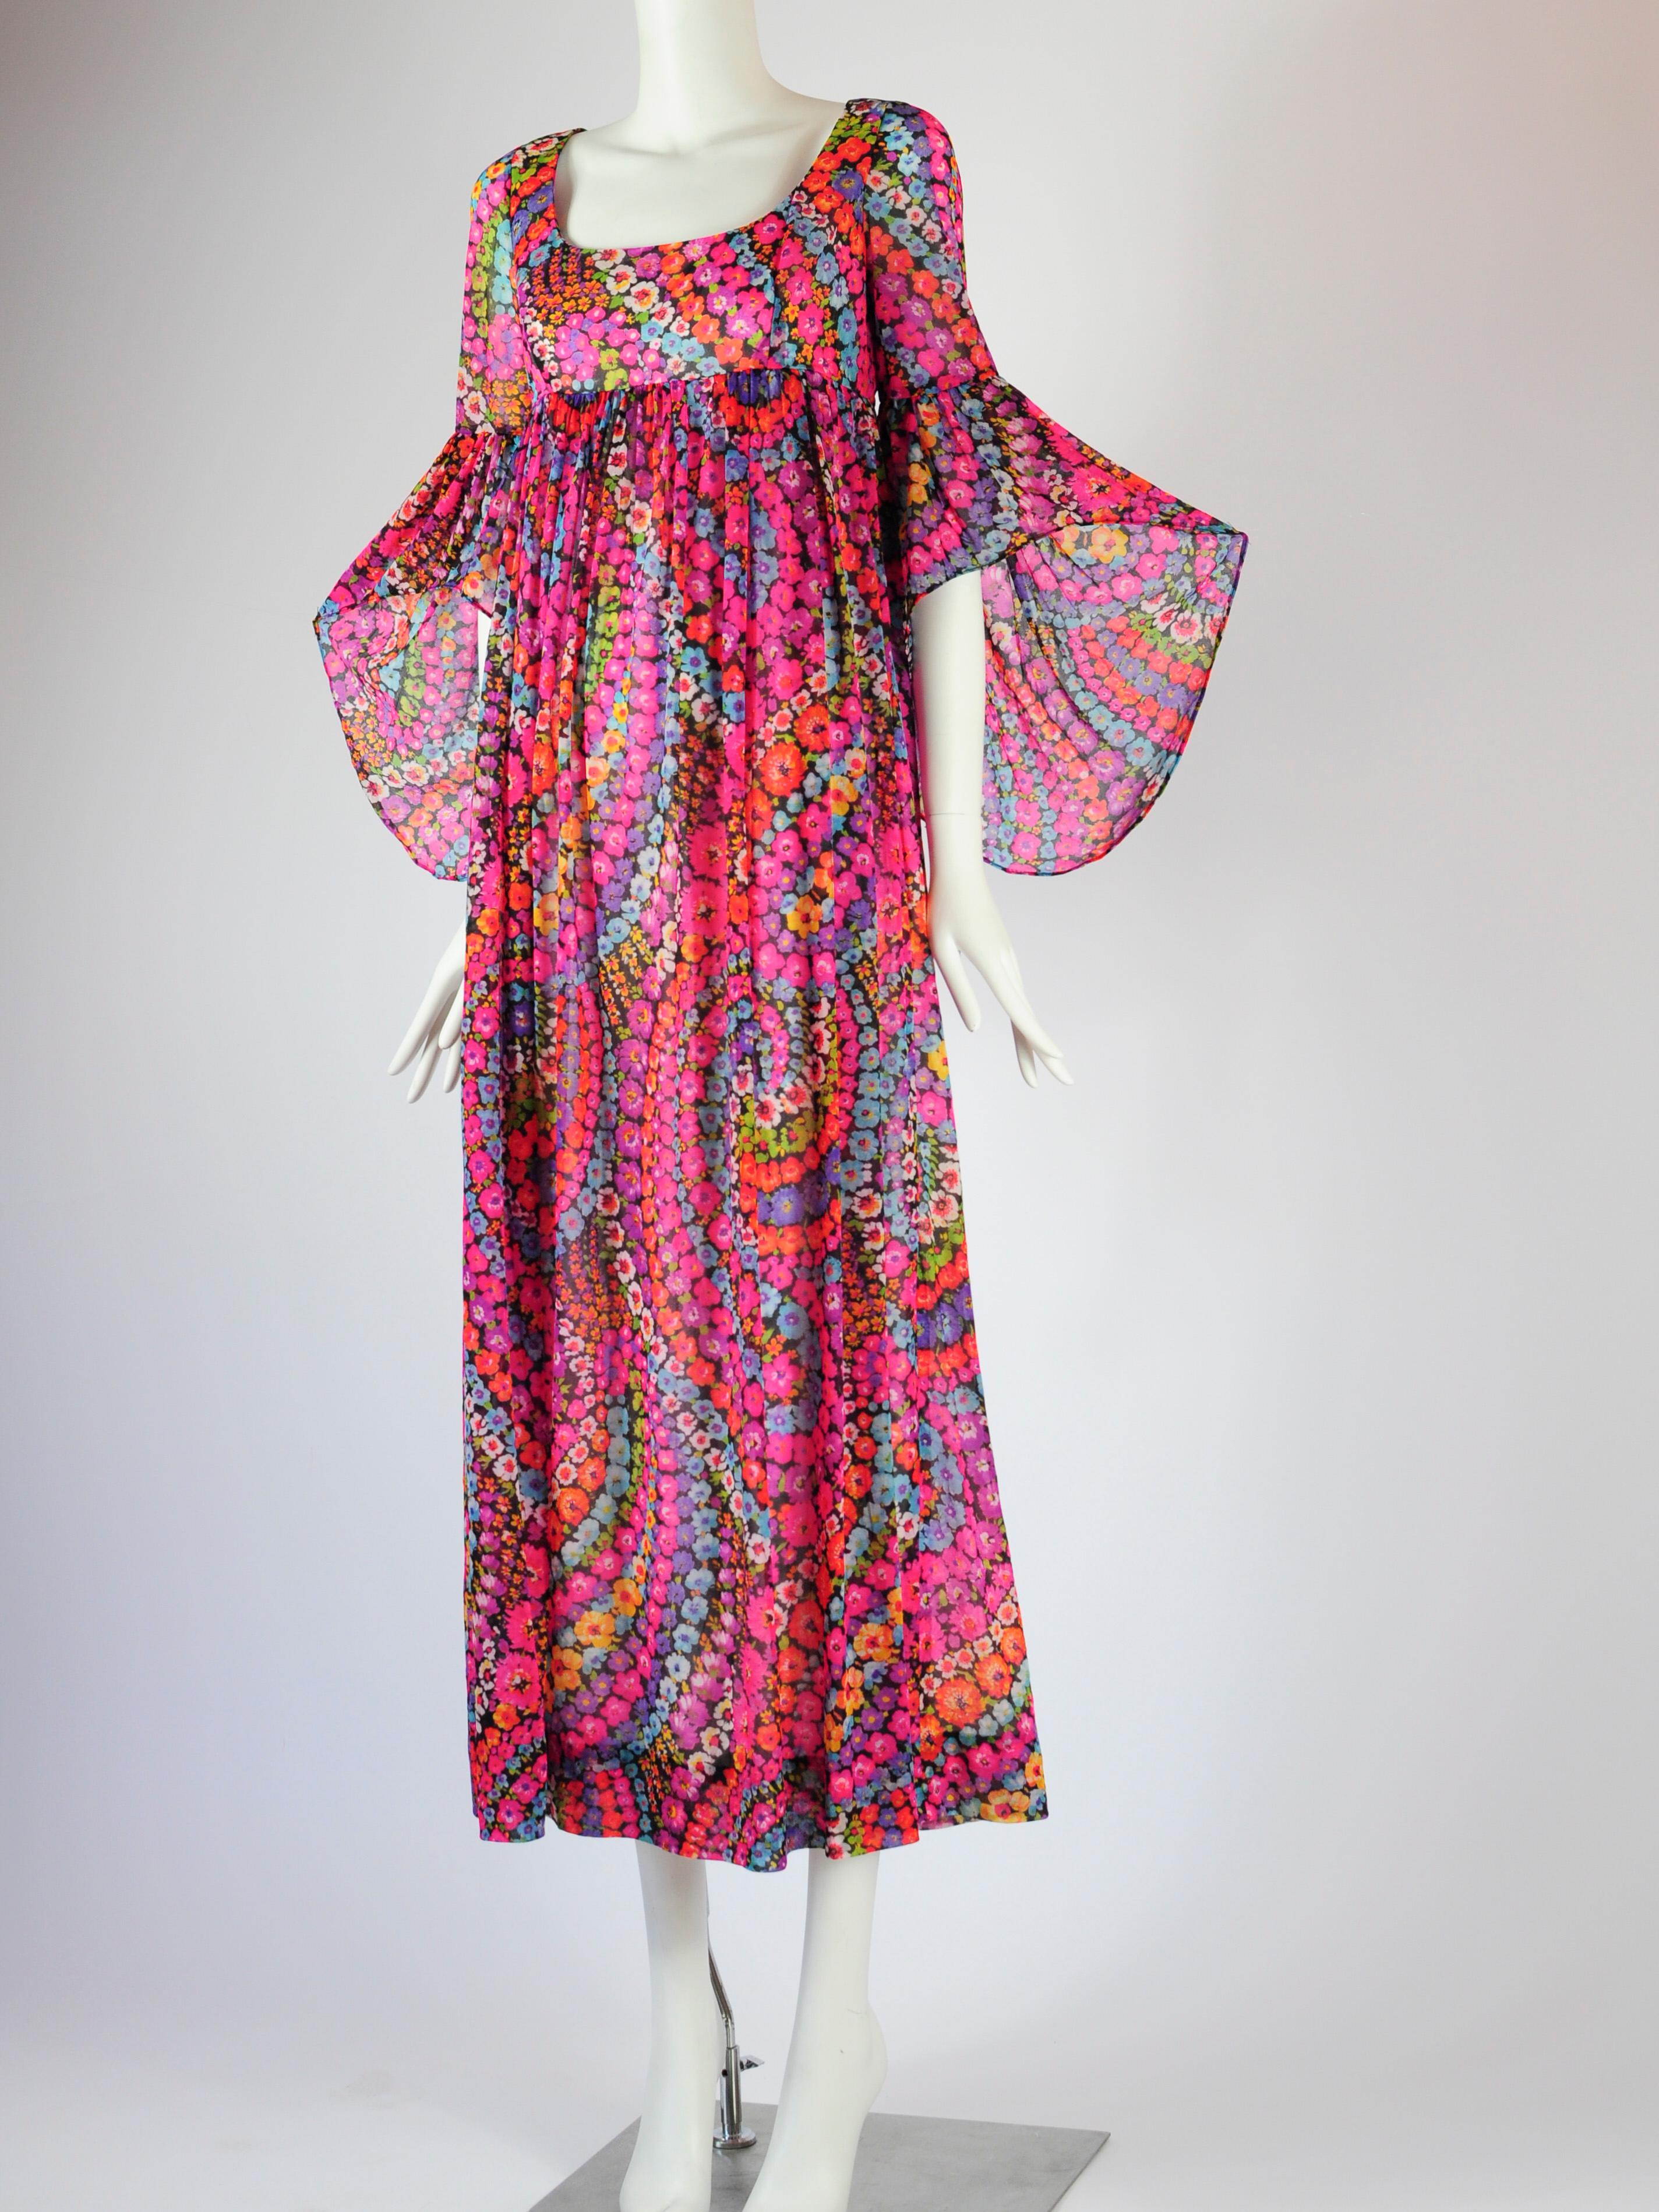 Psychedelic floral print maxi dress by Quad London from the 1970s. The dress has an empire waist with a flowy skirt, and beautiful butterfly sleeves (also sometimes labelled as batwing sleeves or angel sleeces). The 1970s psychedelic multicolour